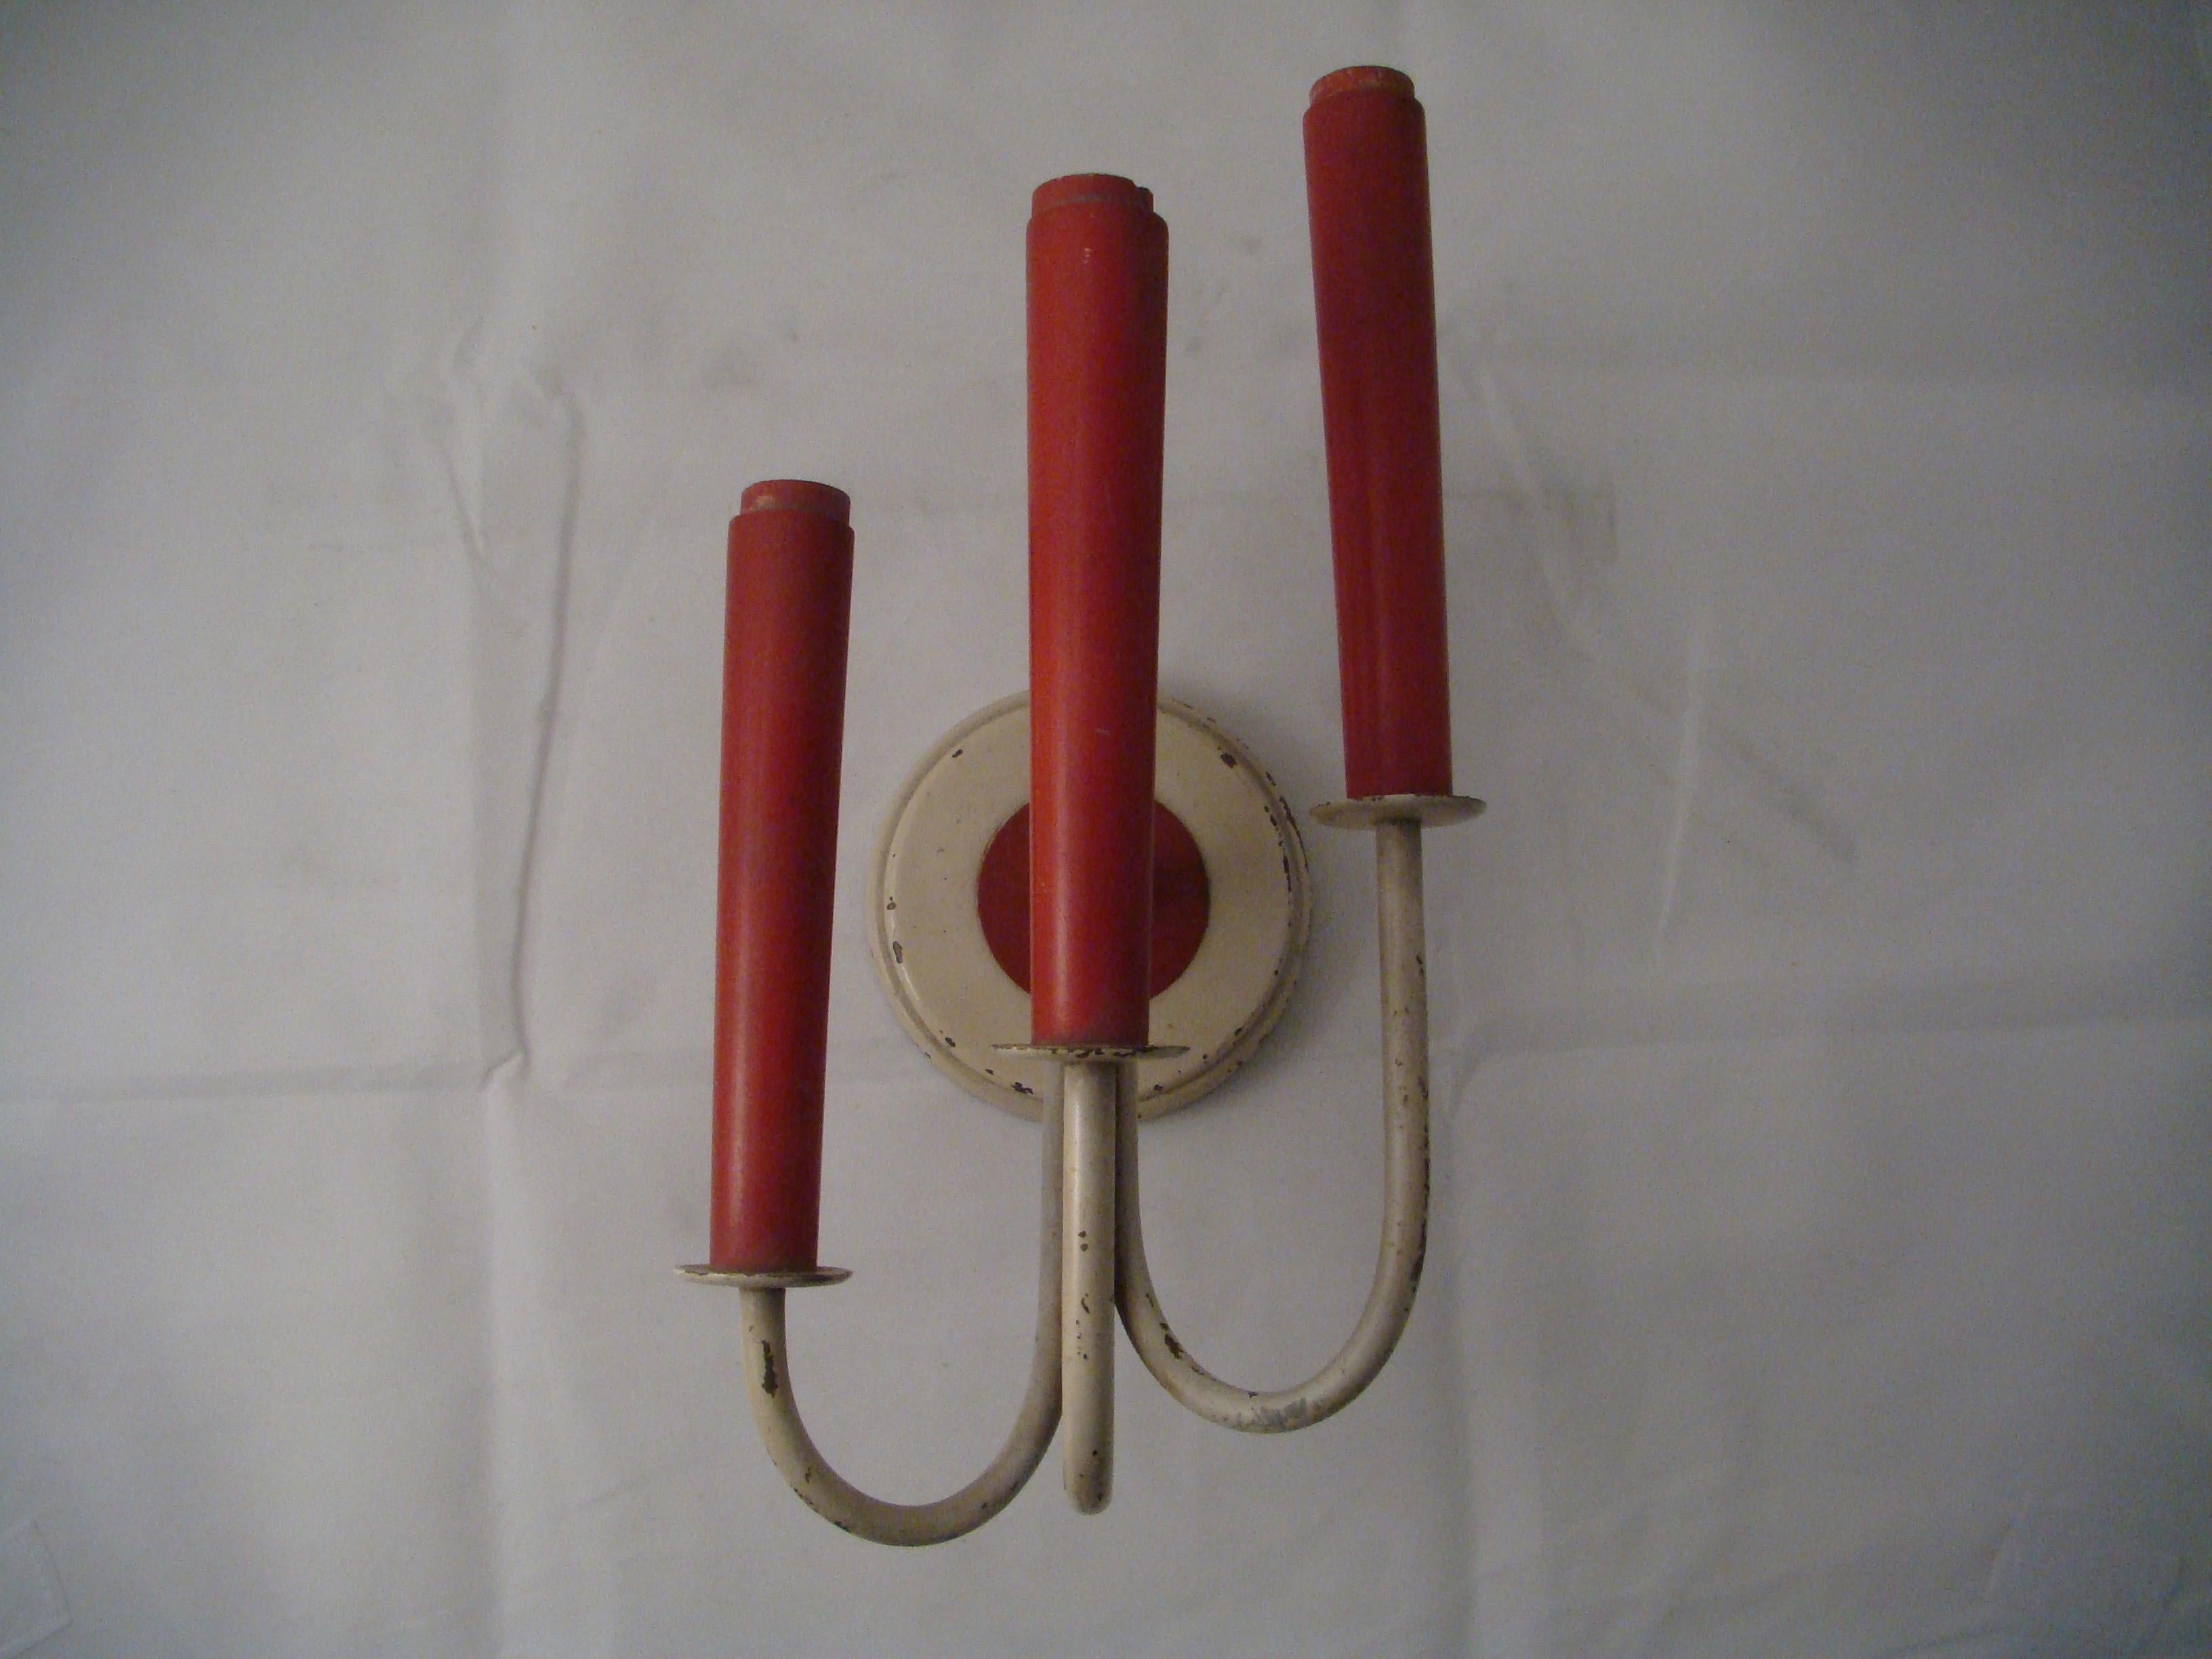 2 Sconces
The appliques are not the same, they have different depths (you can see the measurements drawn on a photo)
Mensures
11,02 inch high x 5.90 width x 5,51 depth /7,08 depth.
To take care of your property and the lives of our customers, the